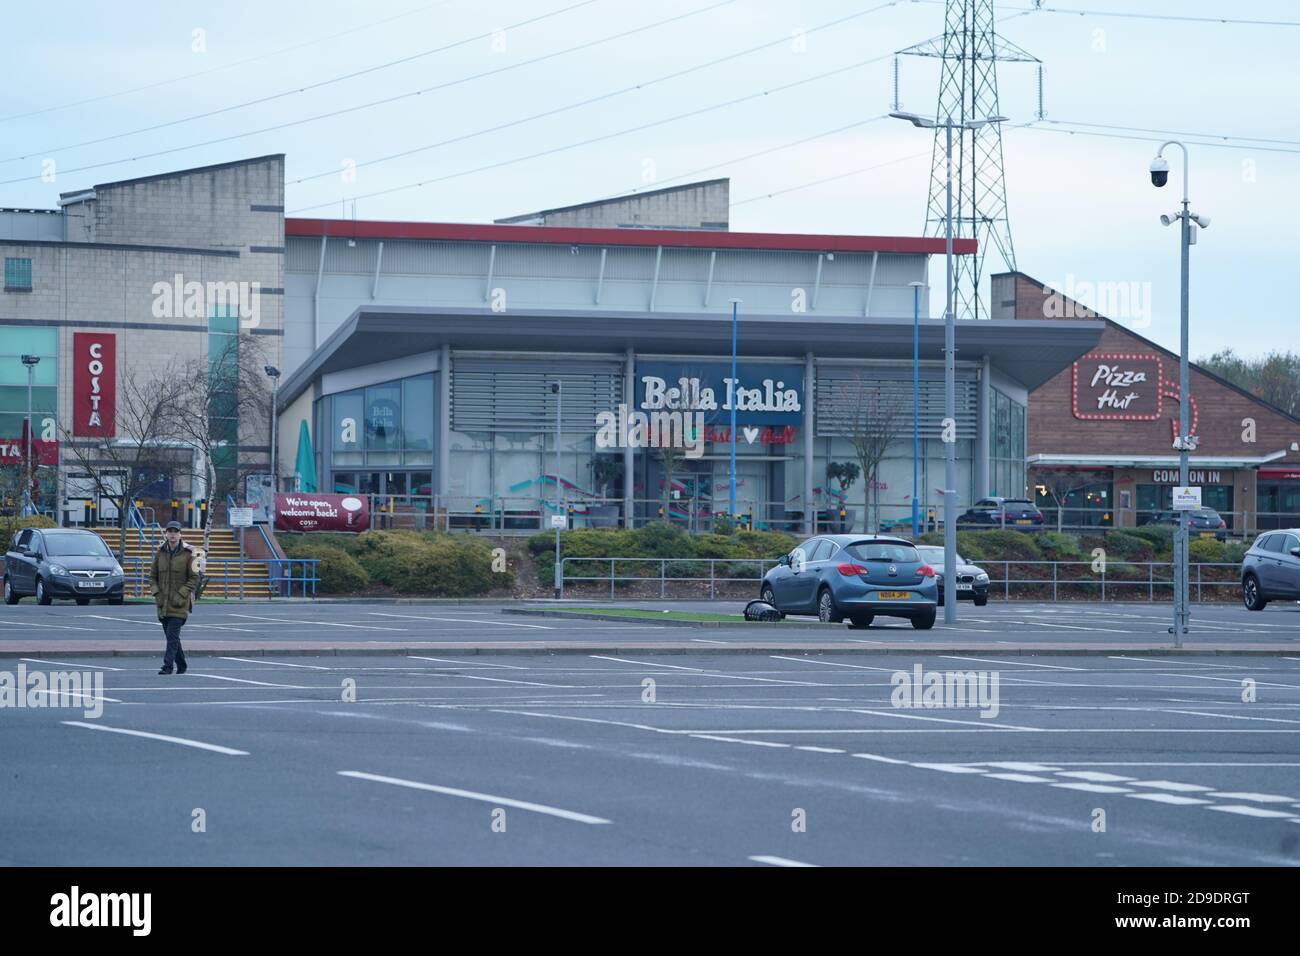 Bella Italia restaurant at Wallsend, Tyneside, at the start of a four week national lockdown for England. Stock Photo